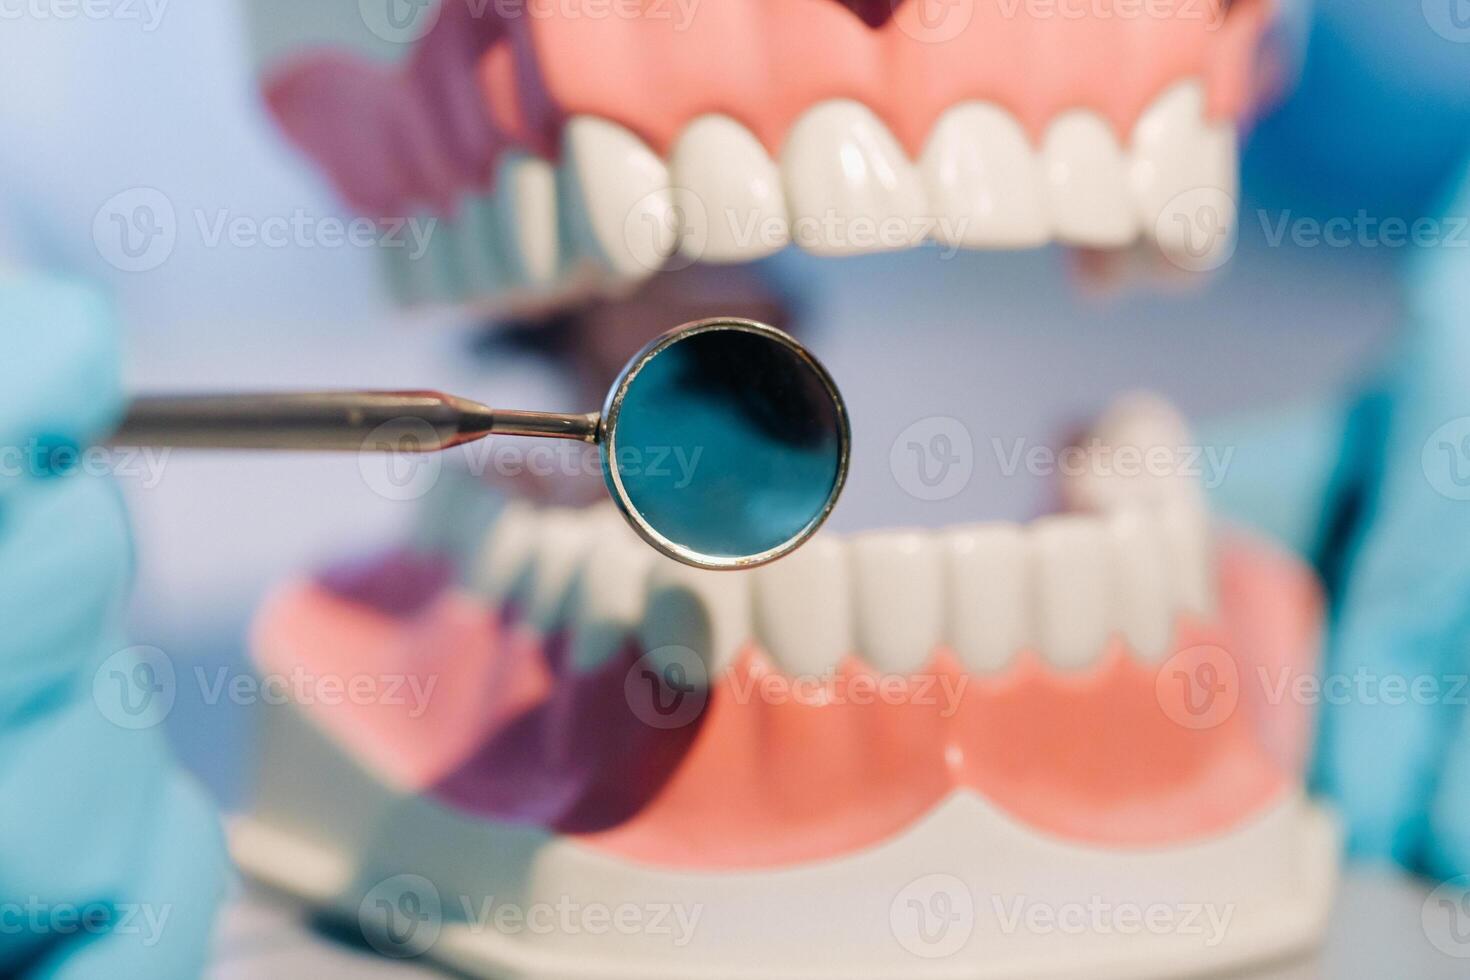 A dental doctor wearing blue gloves and a mask holds a dental model of the upper and lower jaws and a dental mirror photo